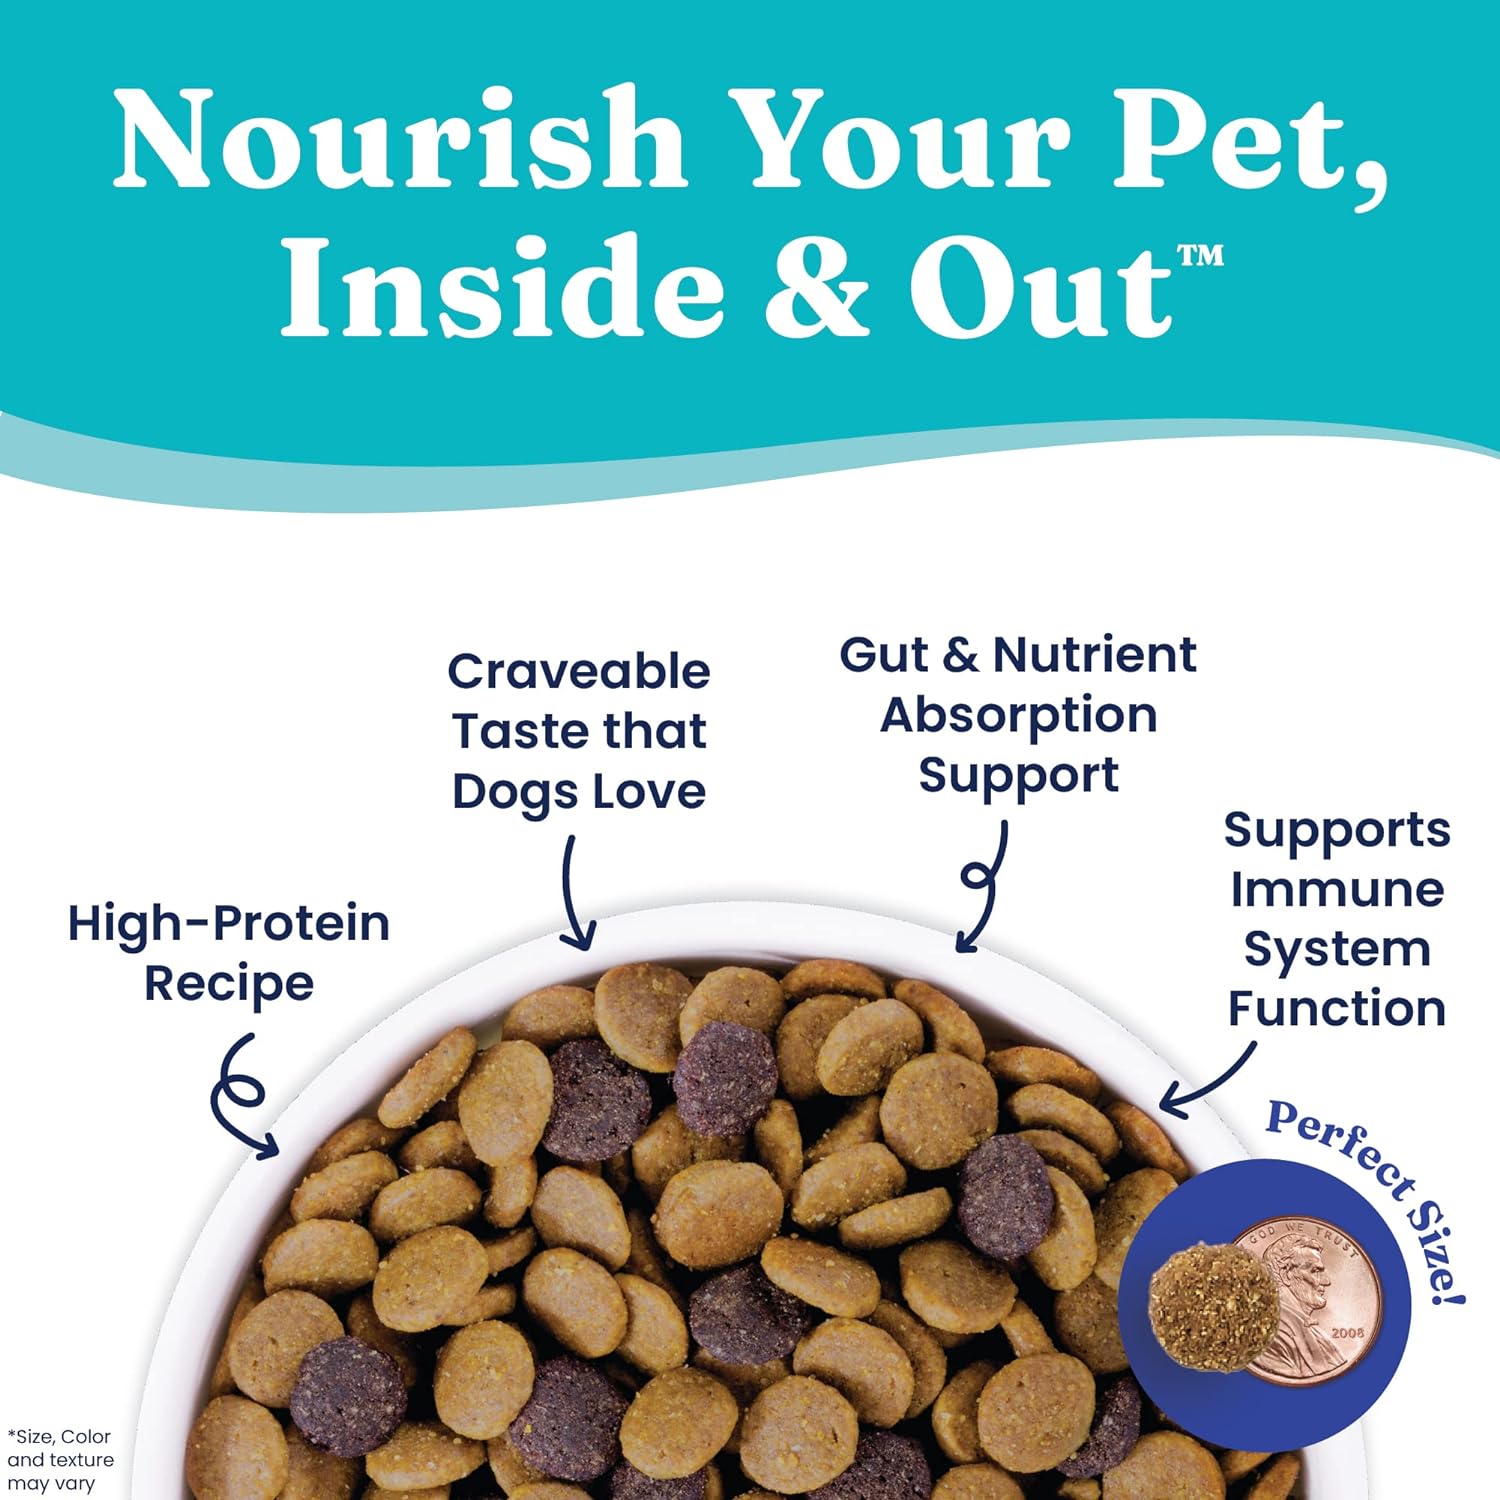 Solid Gold Dry Dog Food w/Nutrientboost for Adult & Senior Dogs - Made with Real Beef, Egg, and Pea - Barking at The Moon High Protein Dog Food for Energy, Digestive and Immune Support - 11 LB Bag: Pet Supplies: Amazon.com